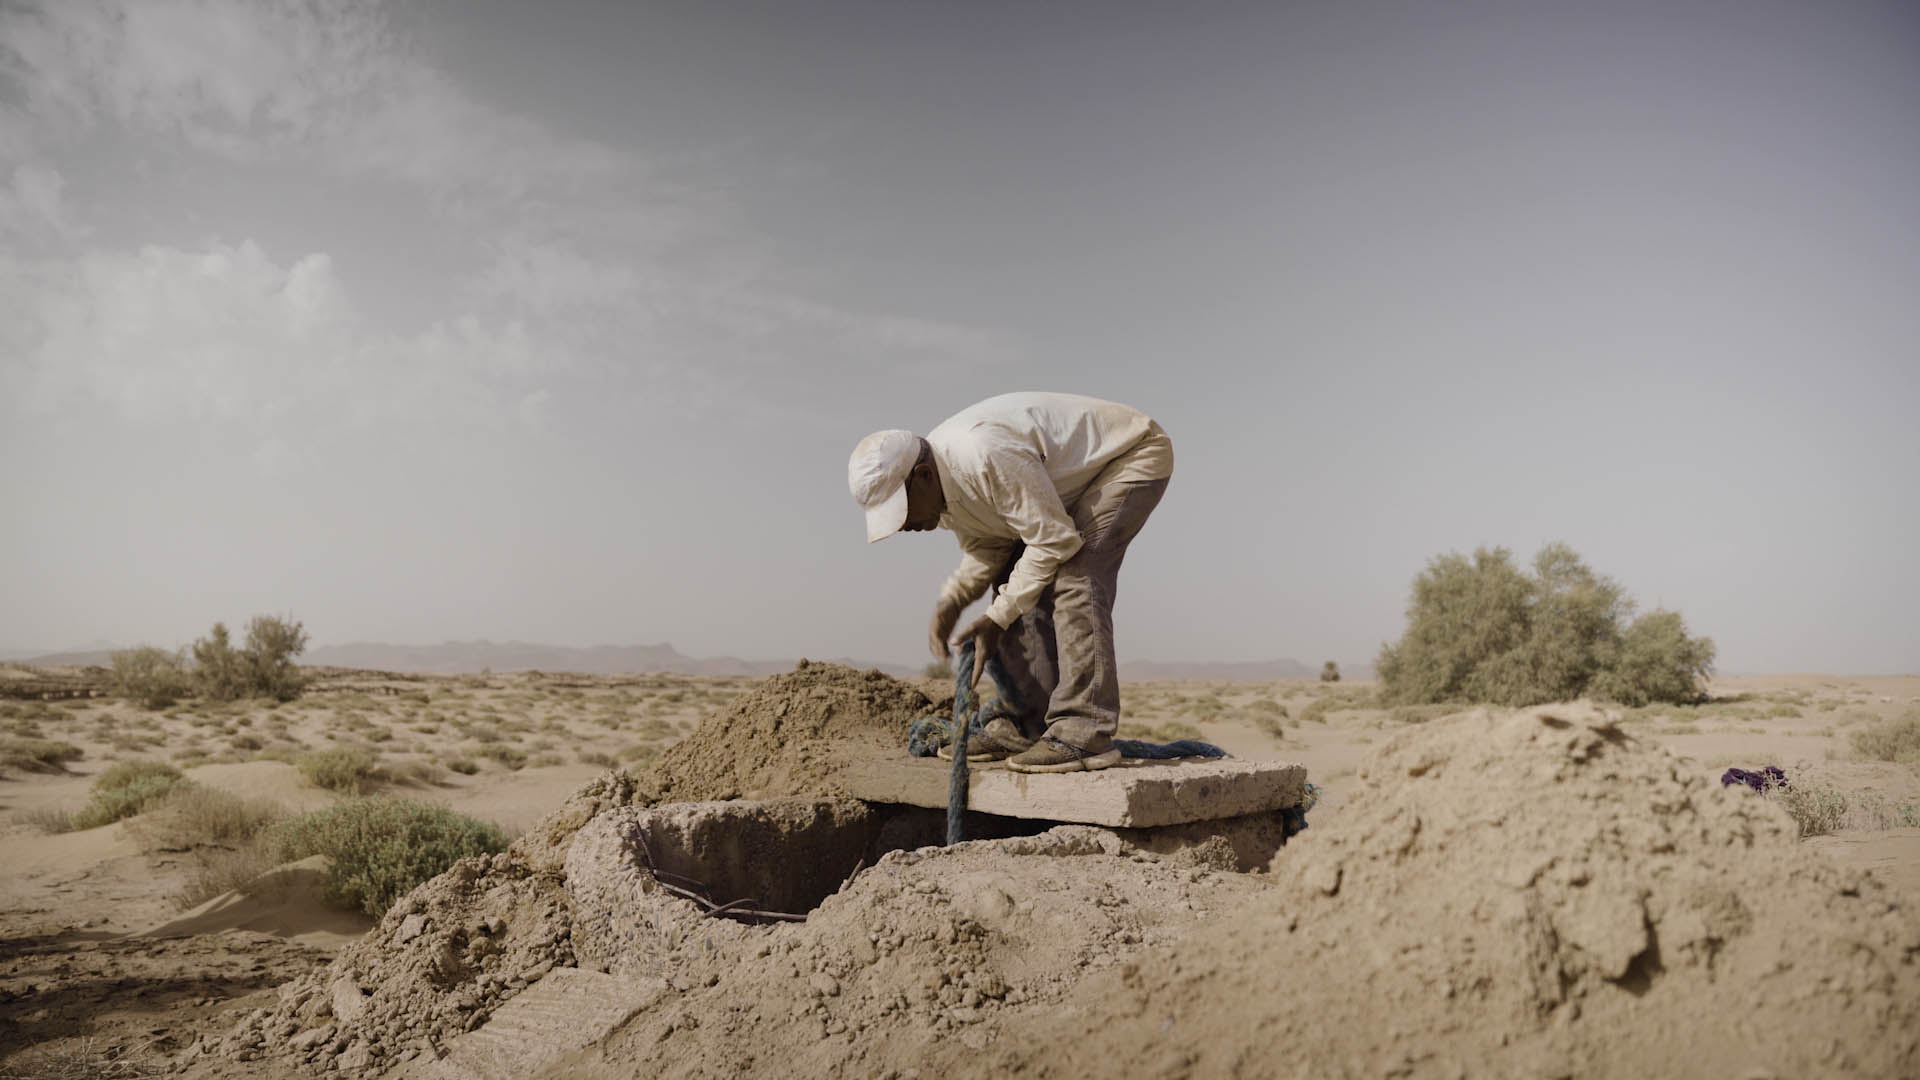 Reviving an oasis with ancient irrigation systems